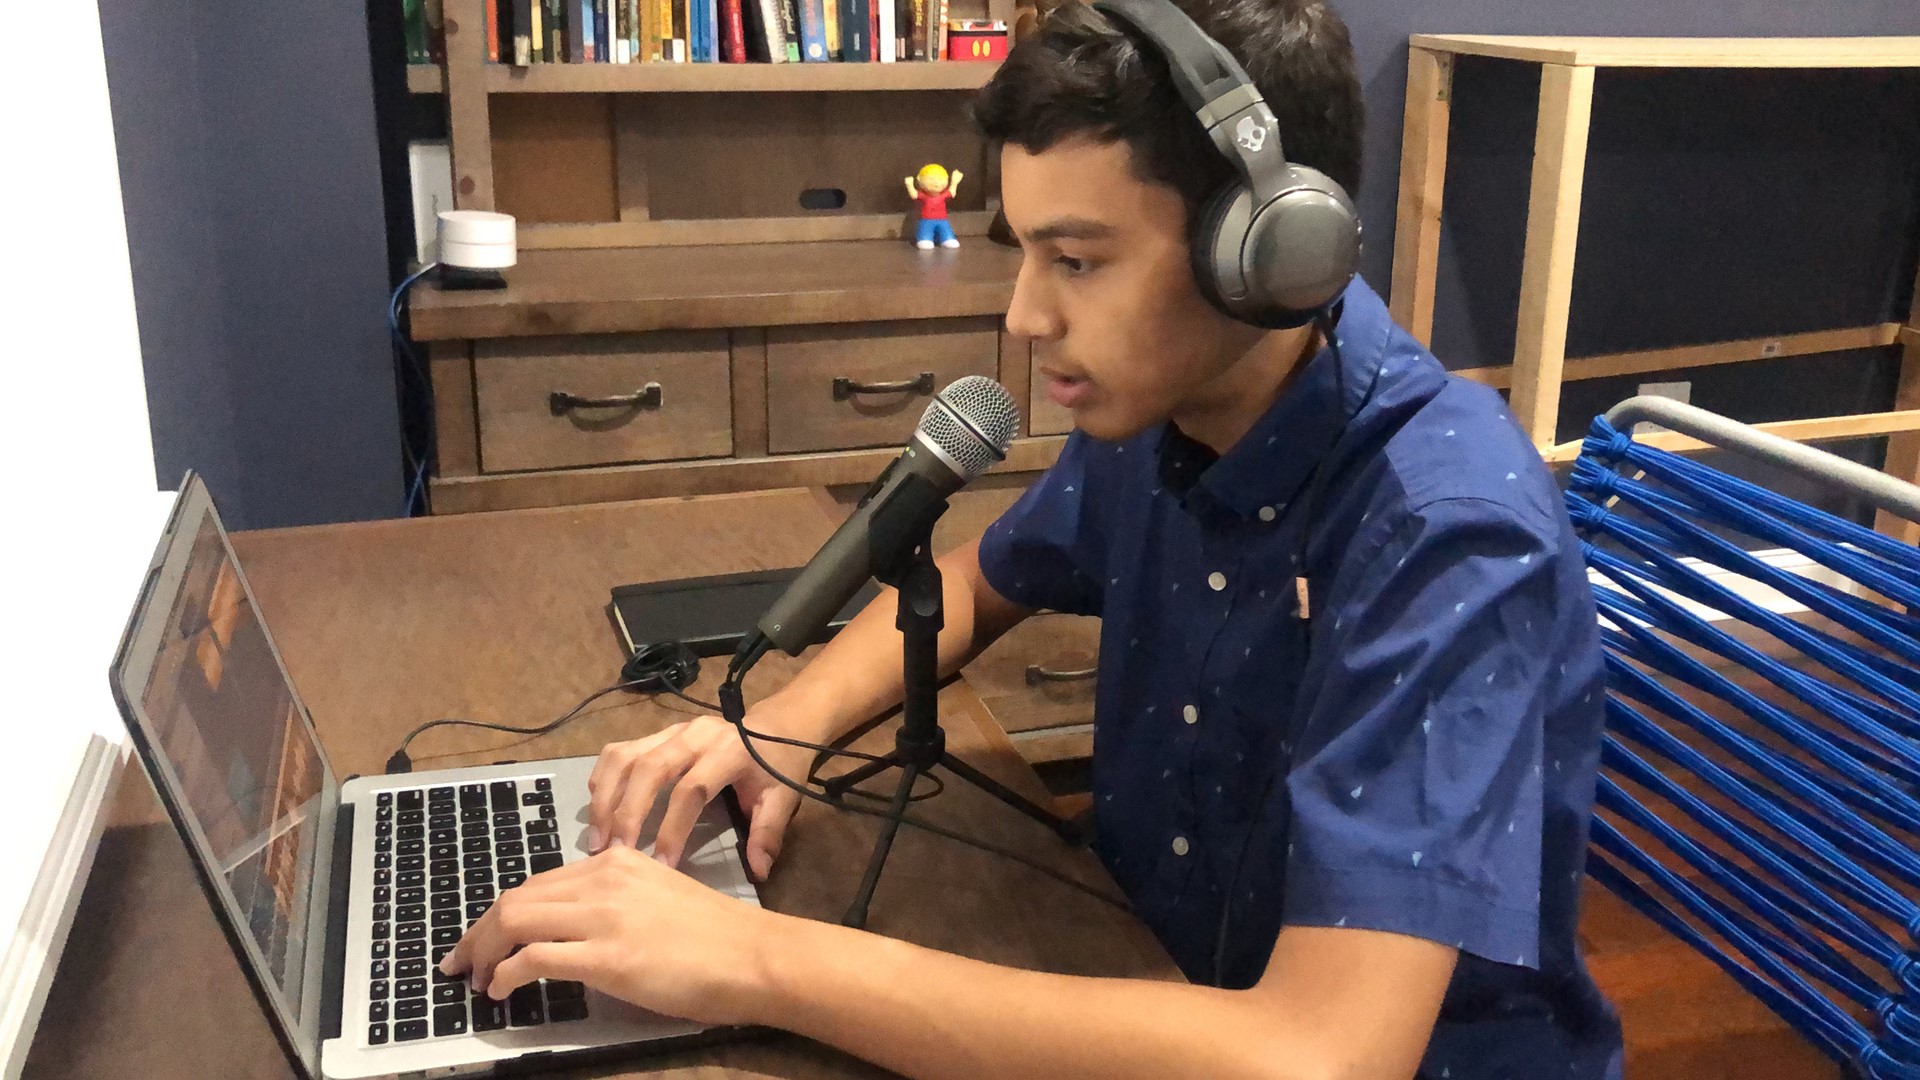 Every week, 15-year-old Faizan Zaidi is asking important questions and shares answers with others as part of a new podcast called “Infectious: Your Guide to Life."